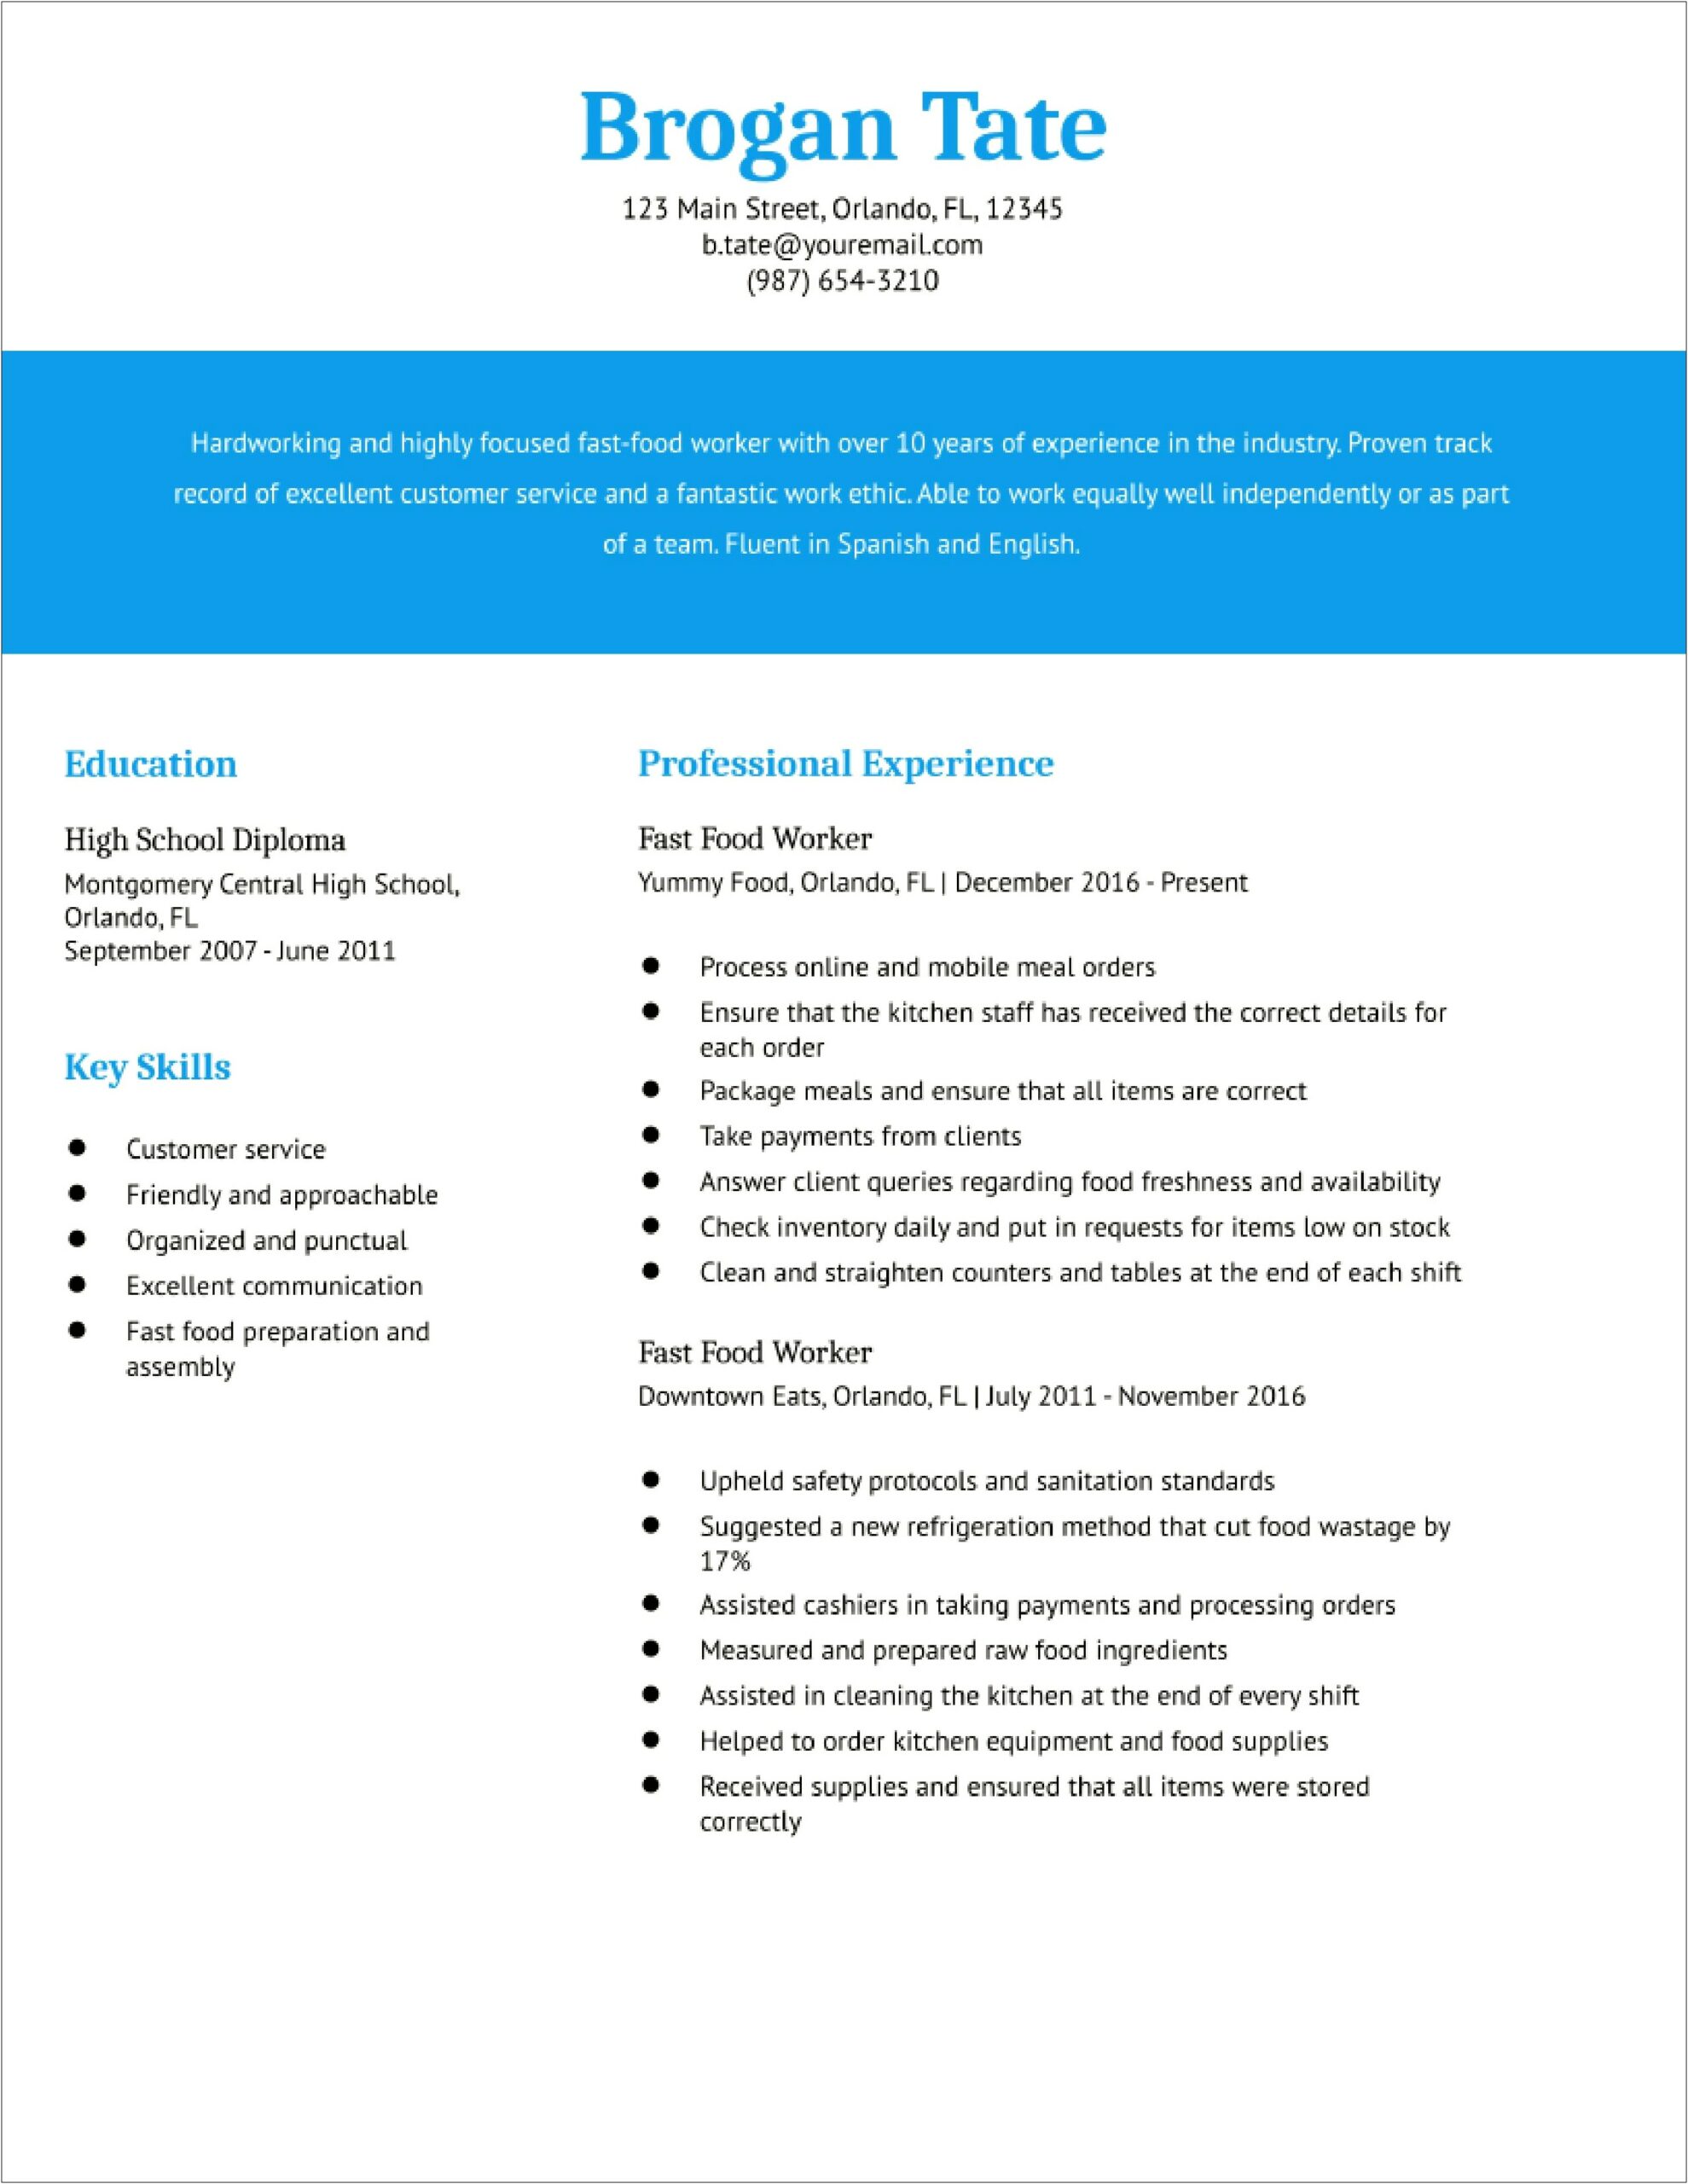 Work Experience Resume Examples Fast Food